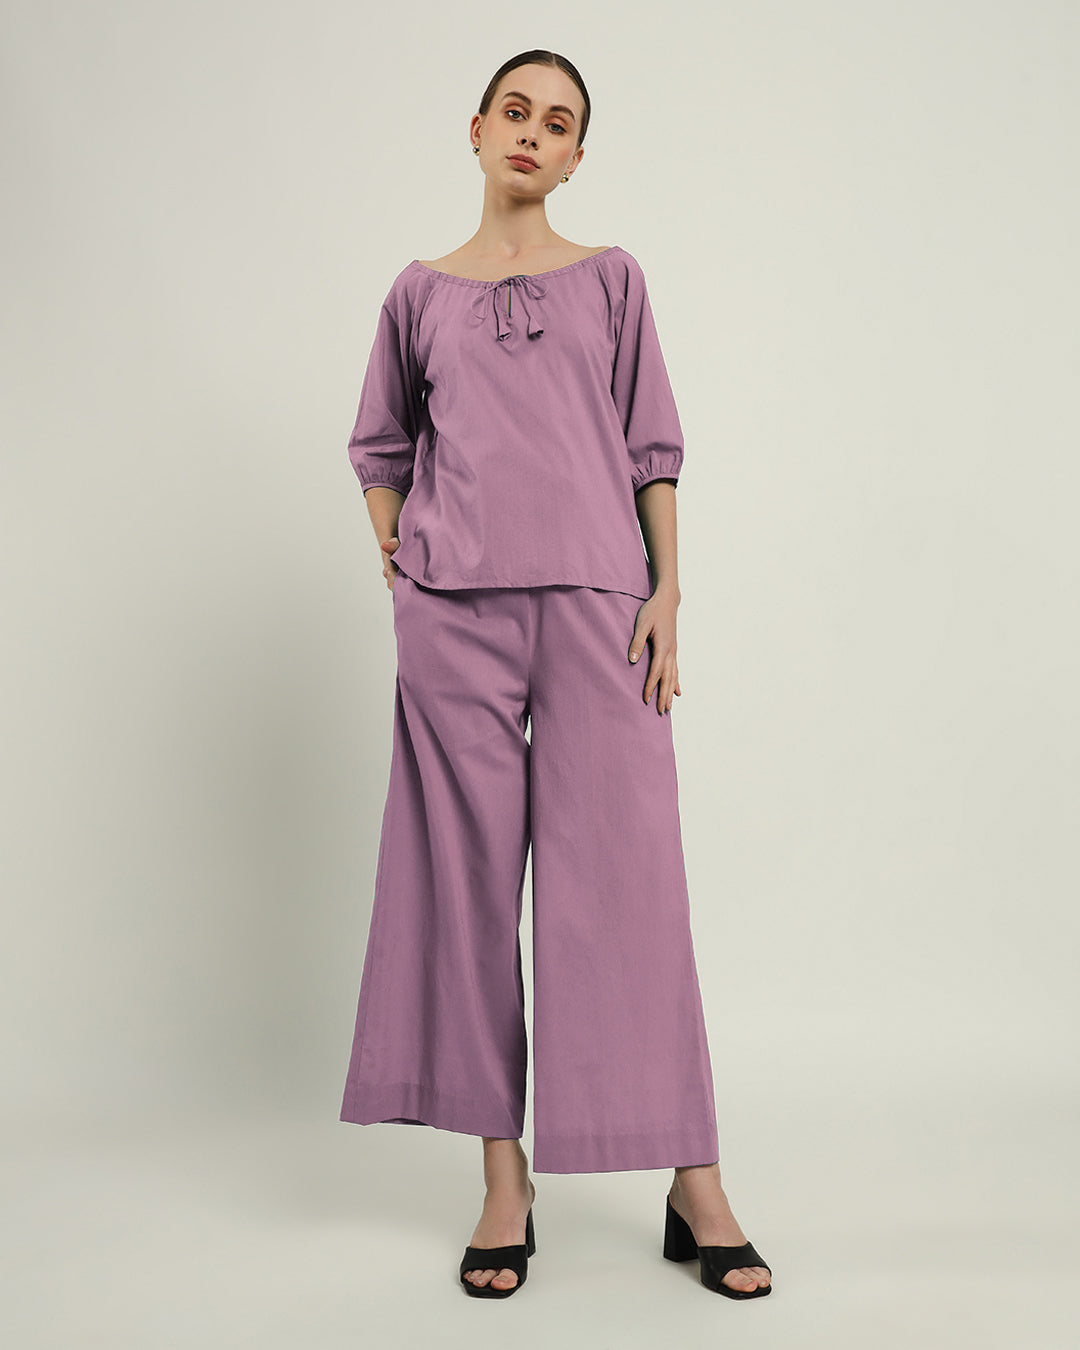 Purple Swirl Effortless BowtNeck Top (Without Bottoms)